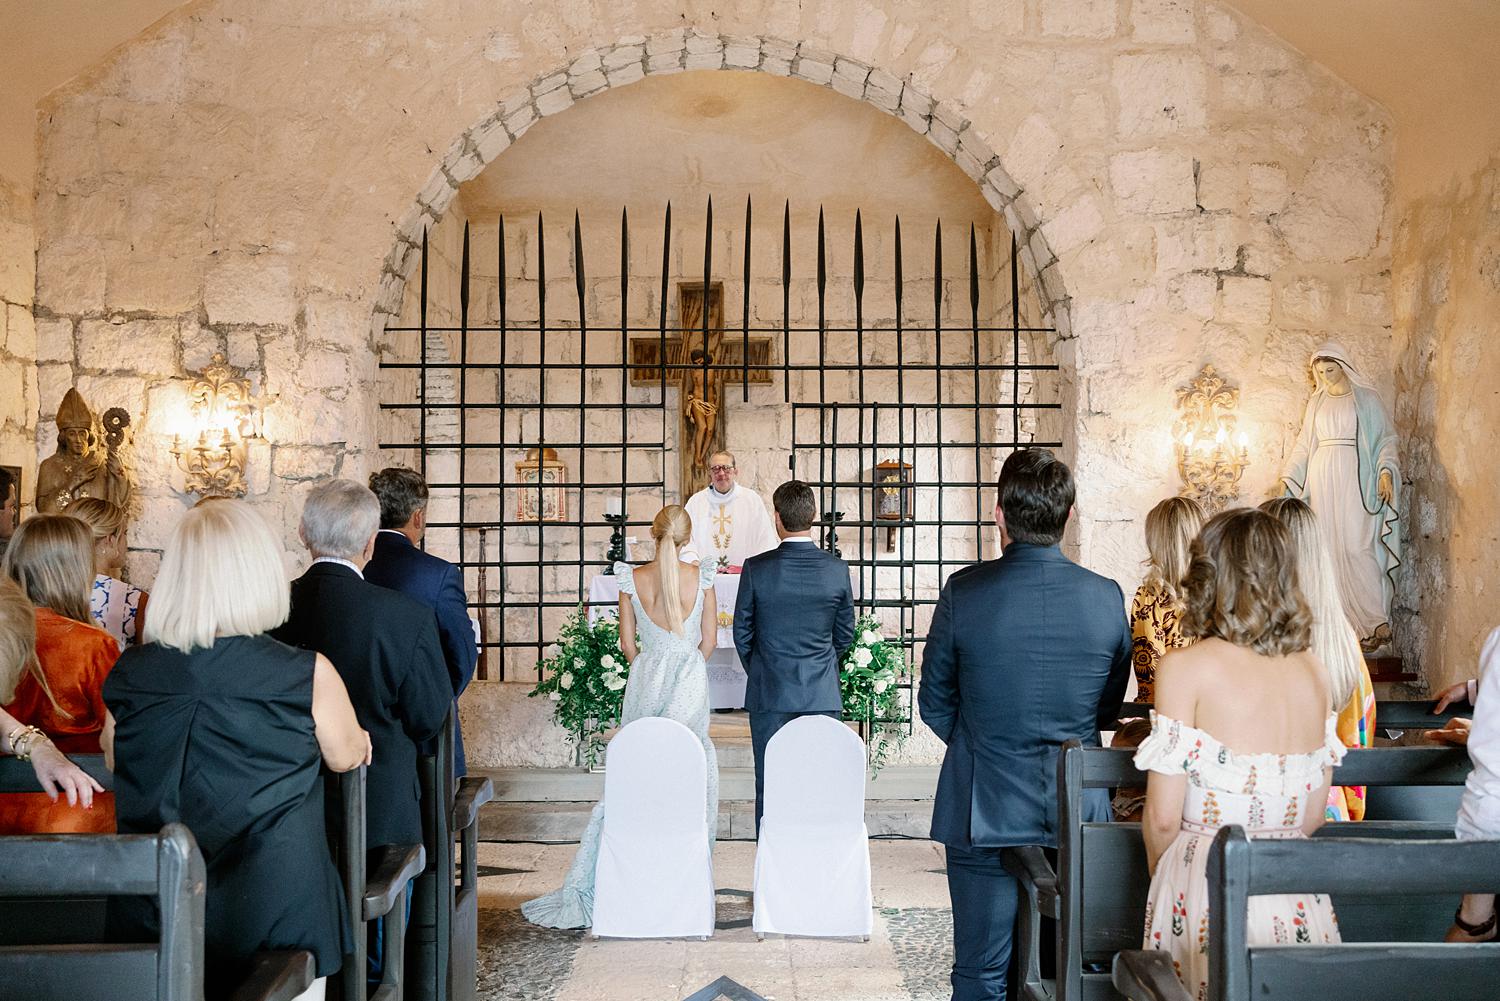 Bride and groom standing together during private family ceremony at Altos De Chavon.